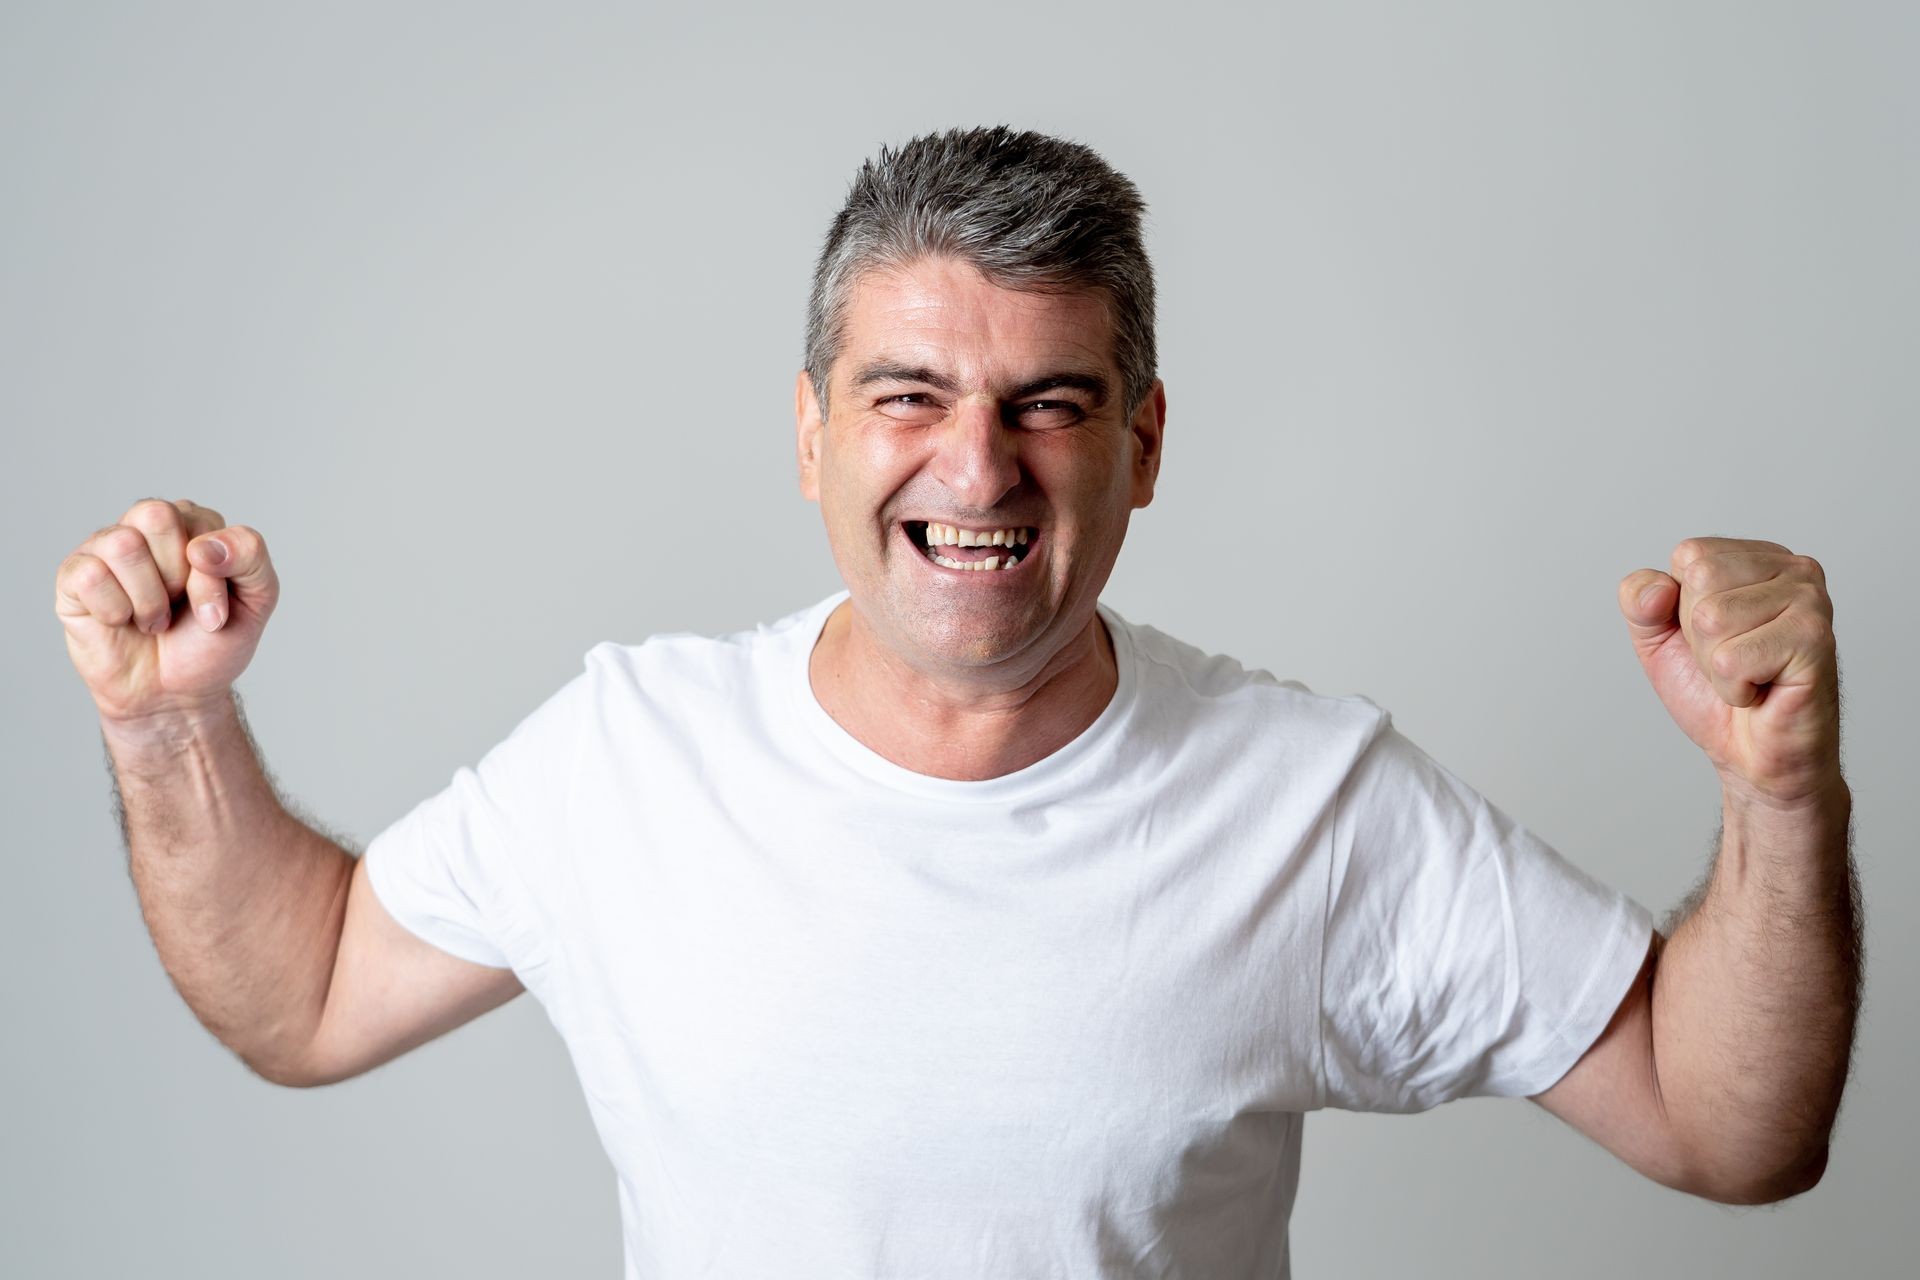 Man rejoices in achieving his goal, wining the lottery or having great success in face expression human emotions surprised and happy facial expression isolated on grey background.